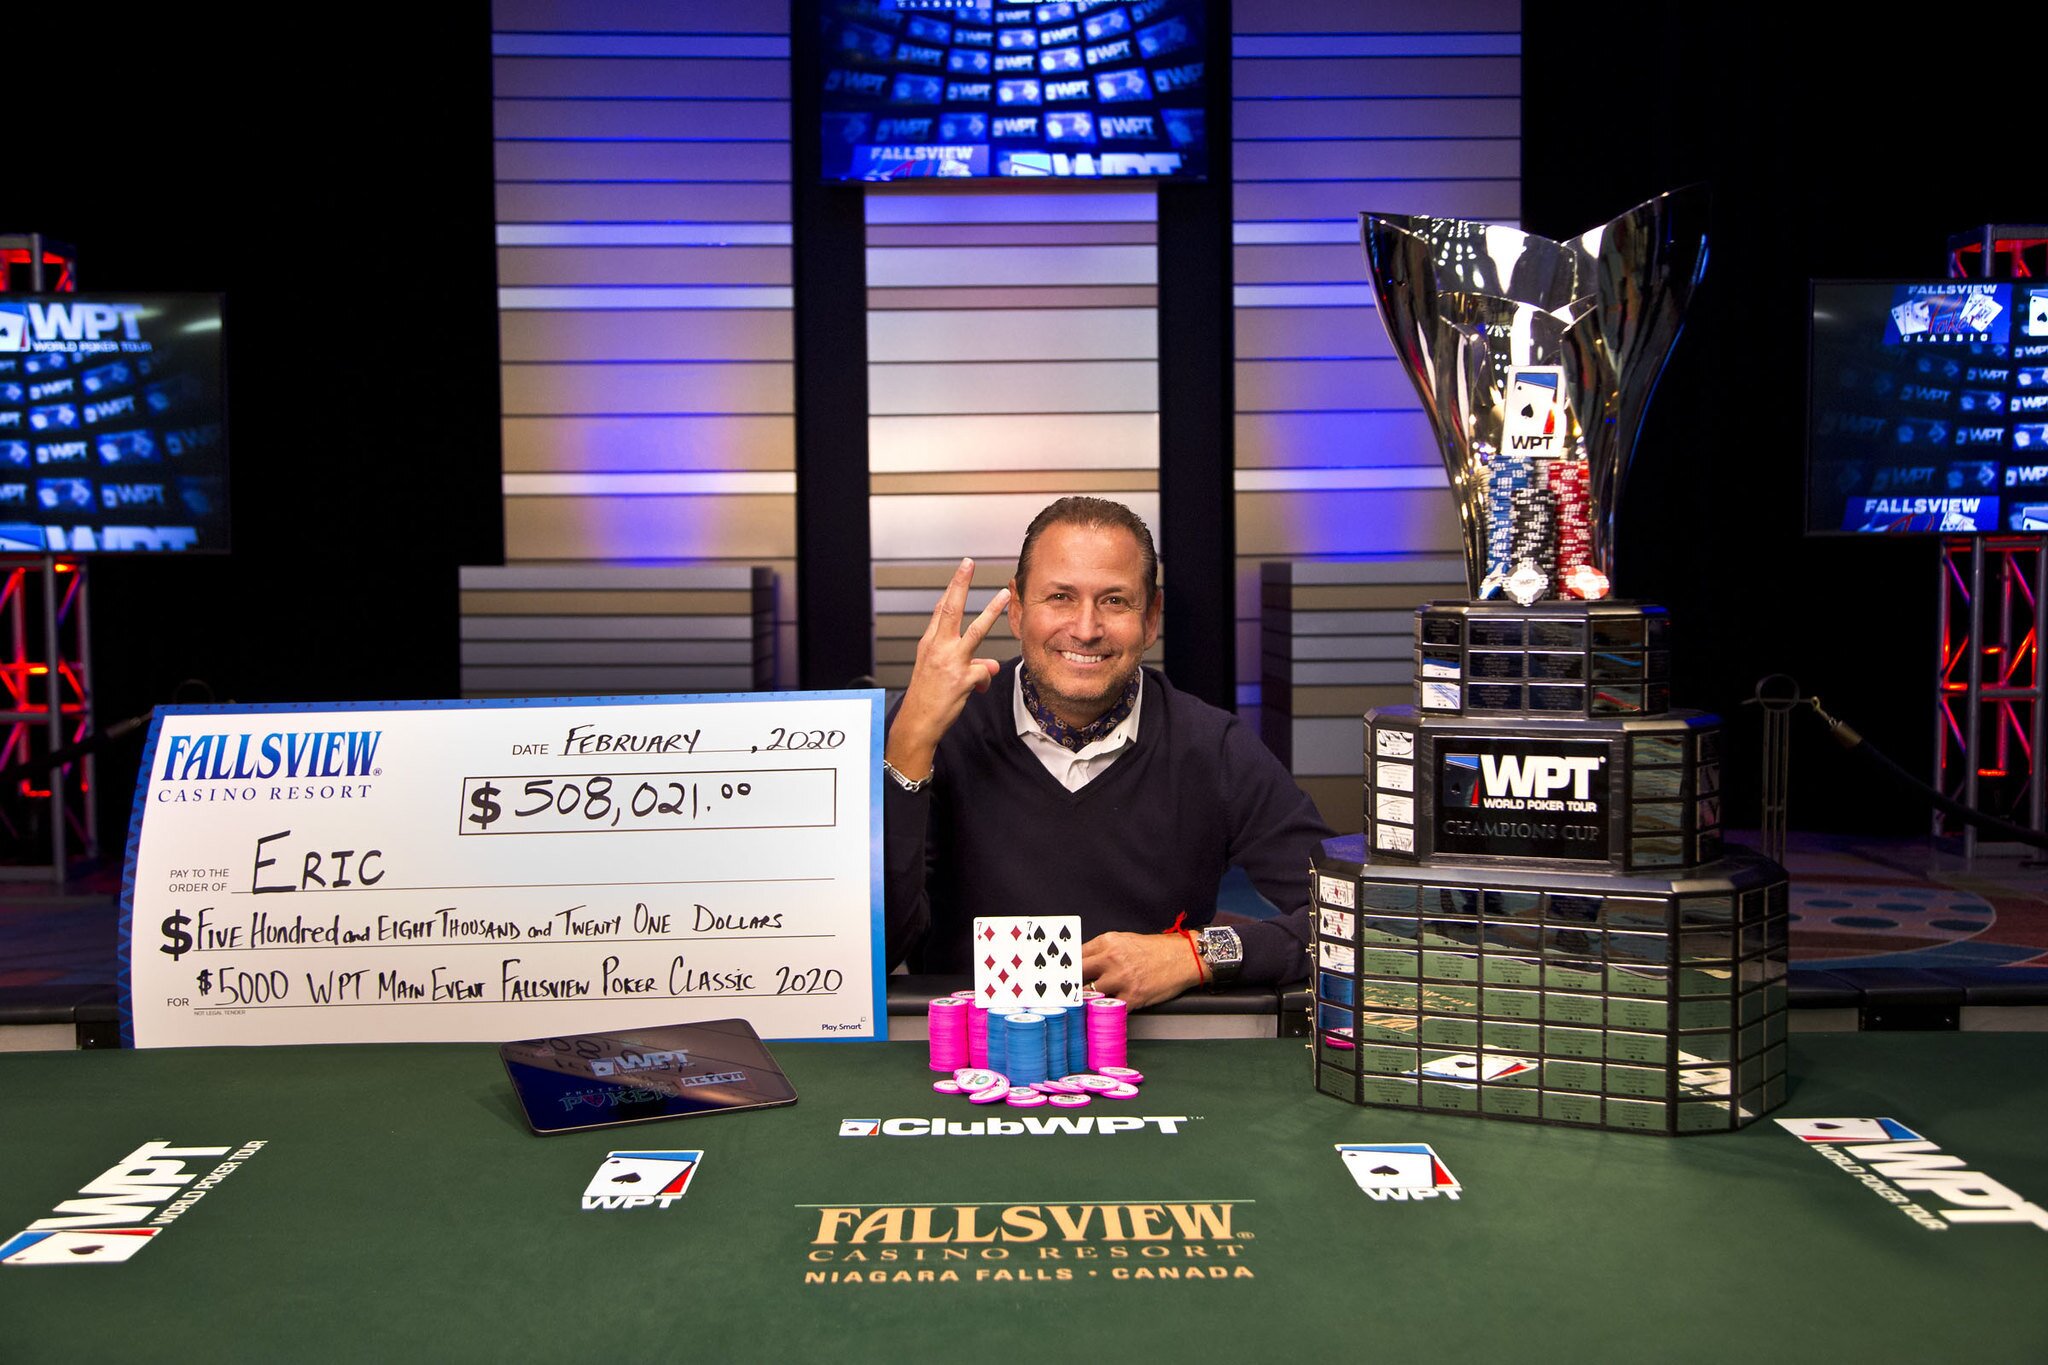 WPT Fallsview Poker Ends with Canadian Winning 3rd Title